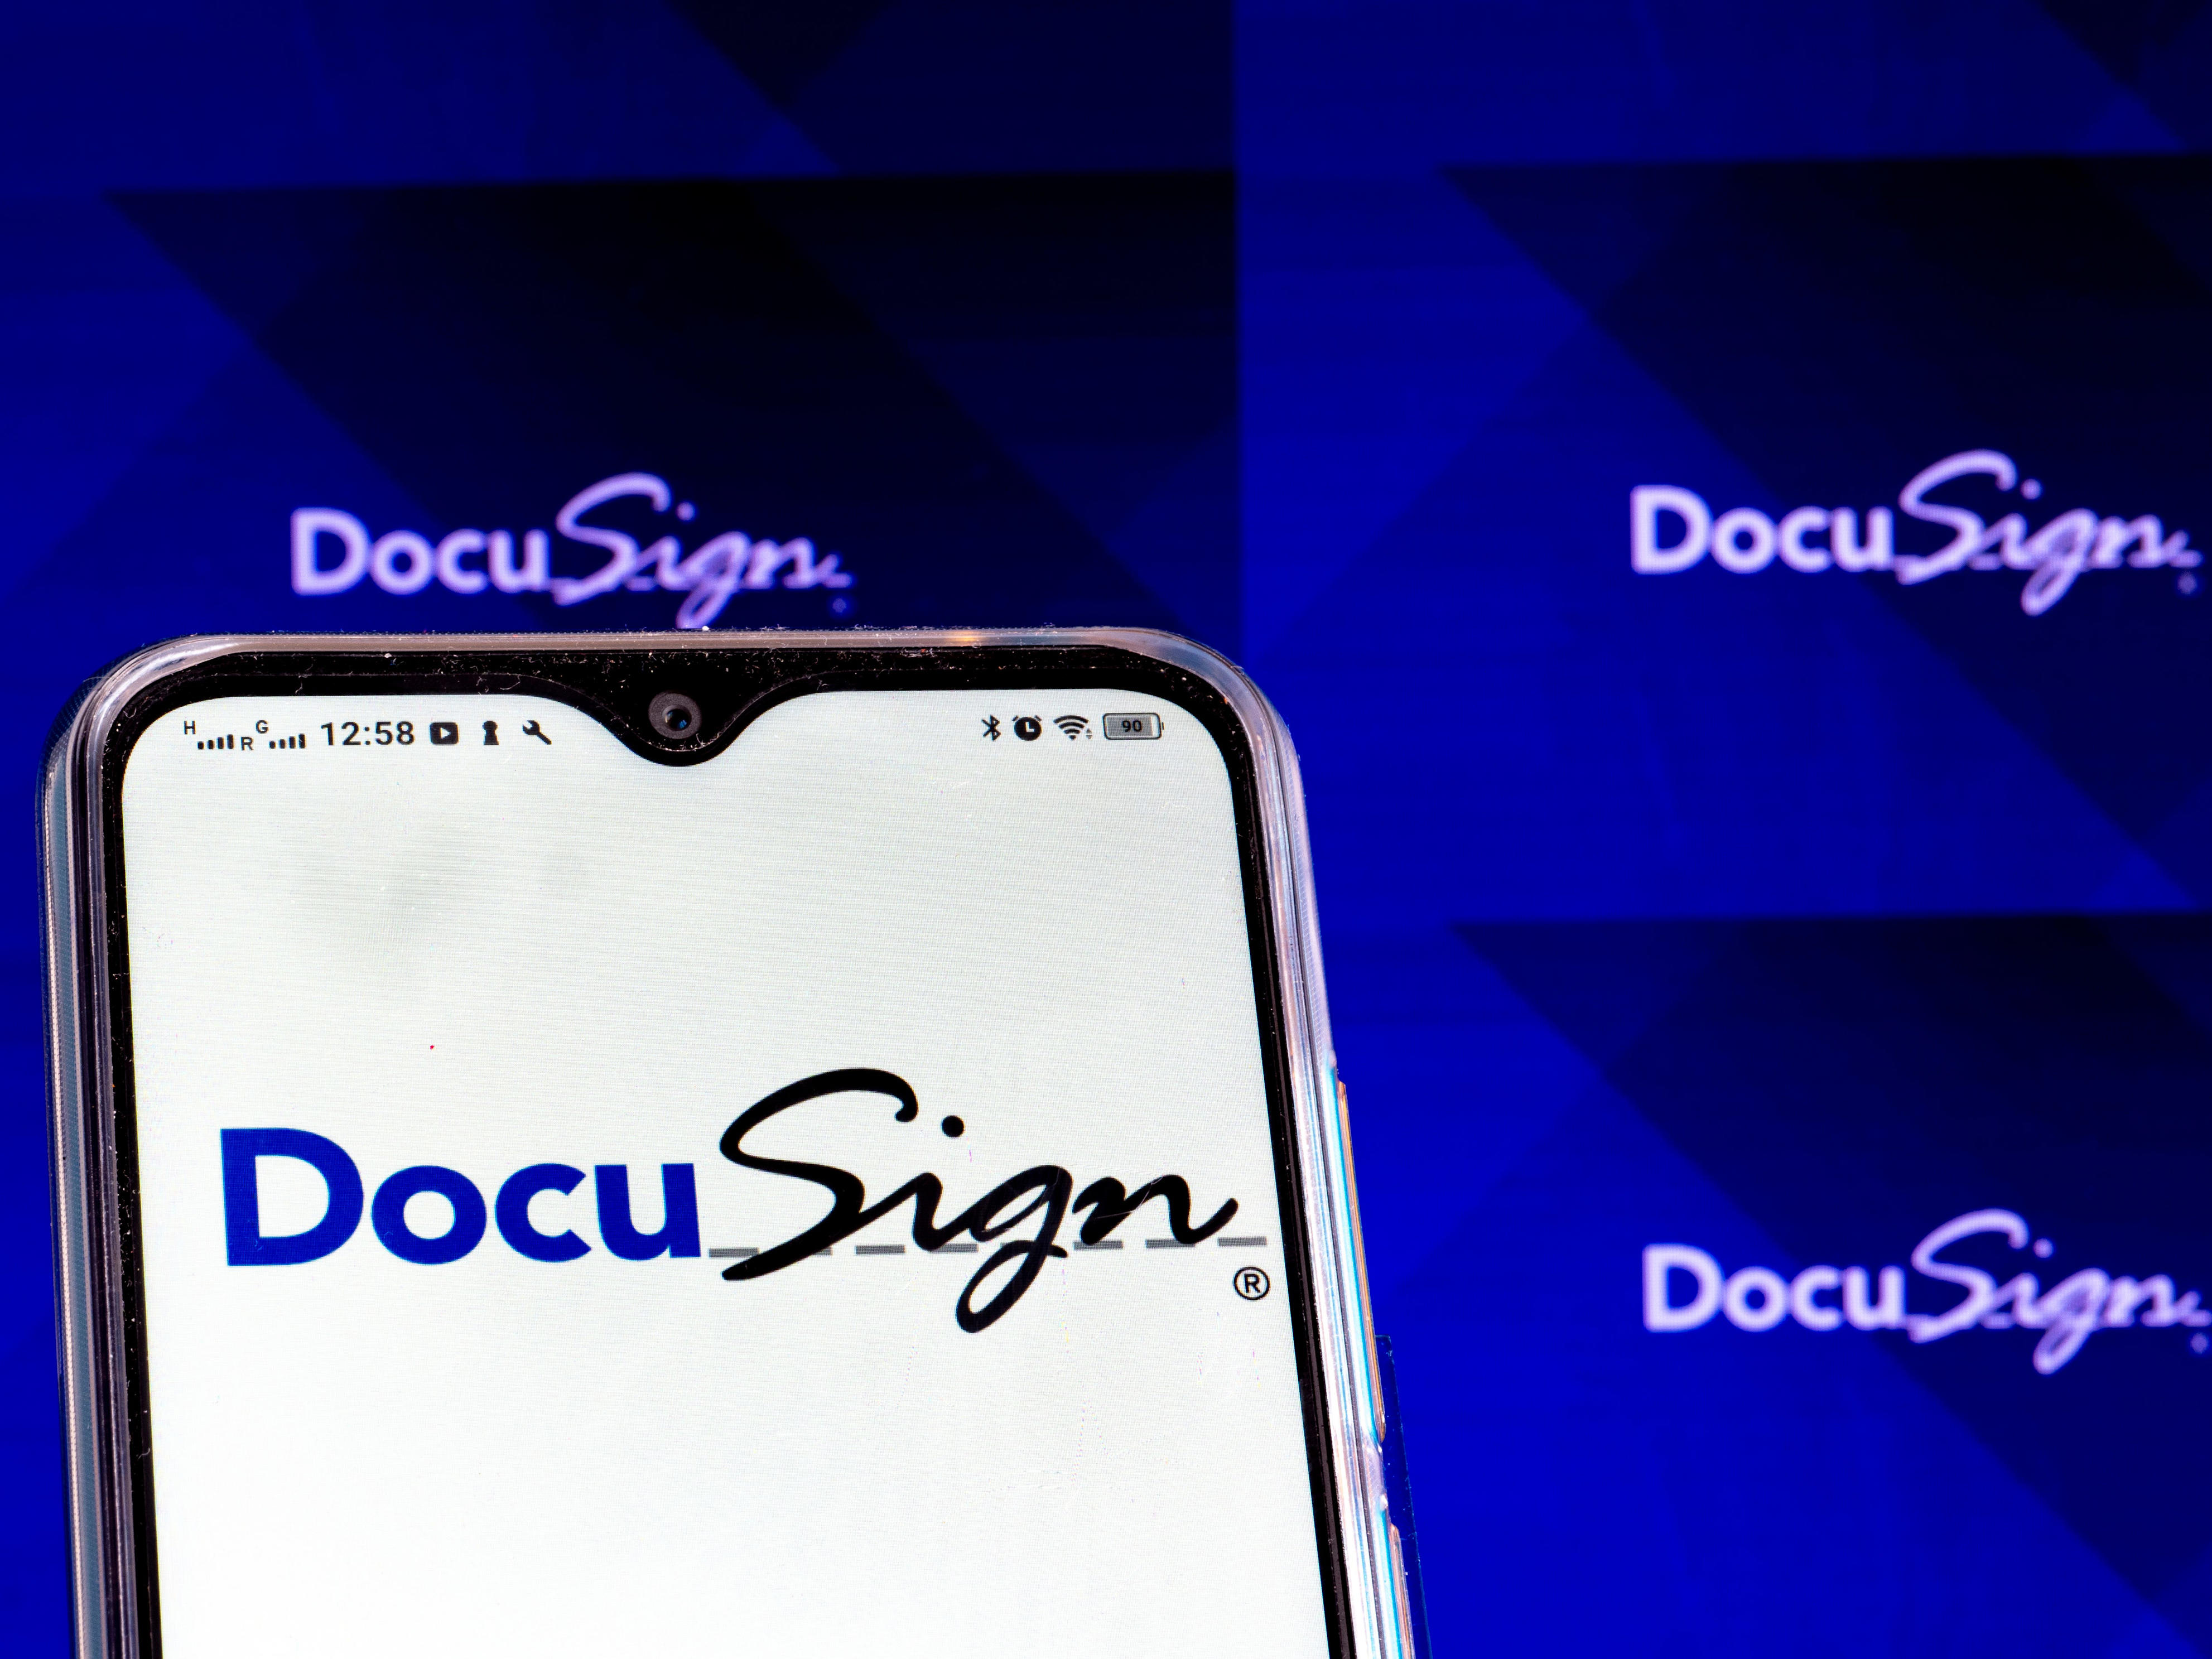 <p>DocuSign plans to slash 10% of employees as part of a restructuring plan "designed to support the company's growth, scale, and profitability objectives," the electronic signature company wrote in a <a href="https://www.sec.gov/Archives/edgar/data/1261333/000126133323000007/docu-20230216.htm" rel="noopener">Securities and Exchange Commission filing</a> on Feb. 16. </p><p>The company said the restructuring plan is expected to be complete by the second quarter of fiscal 2024, per the filing. </p>